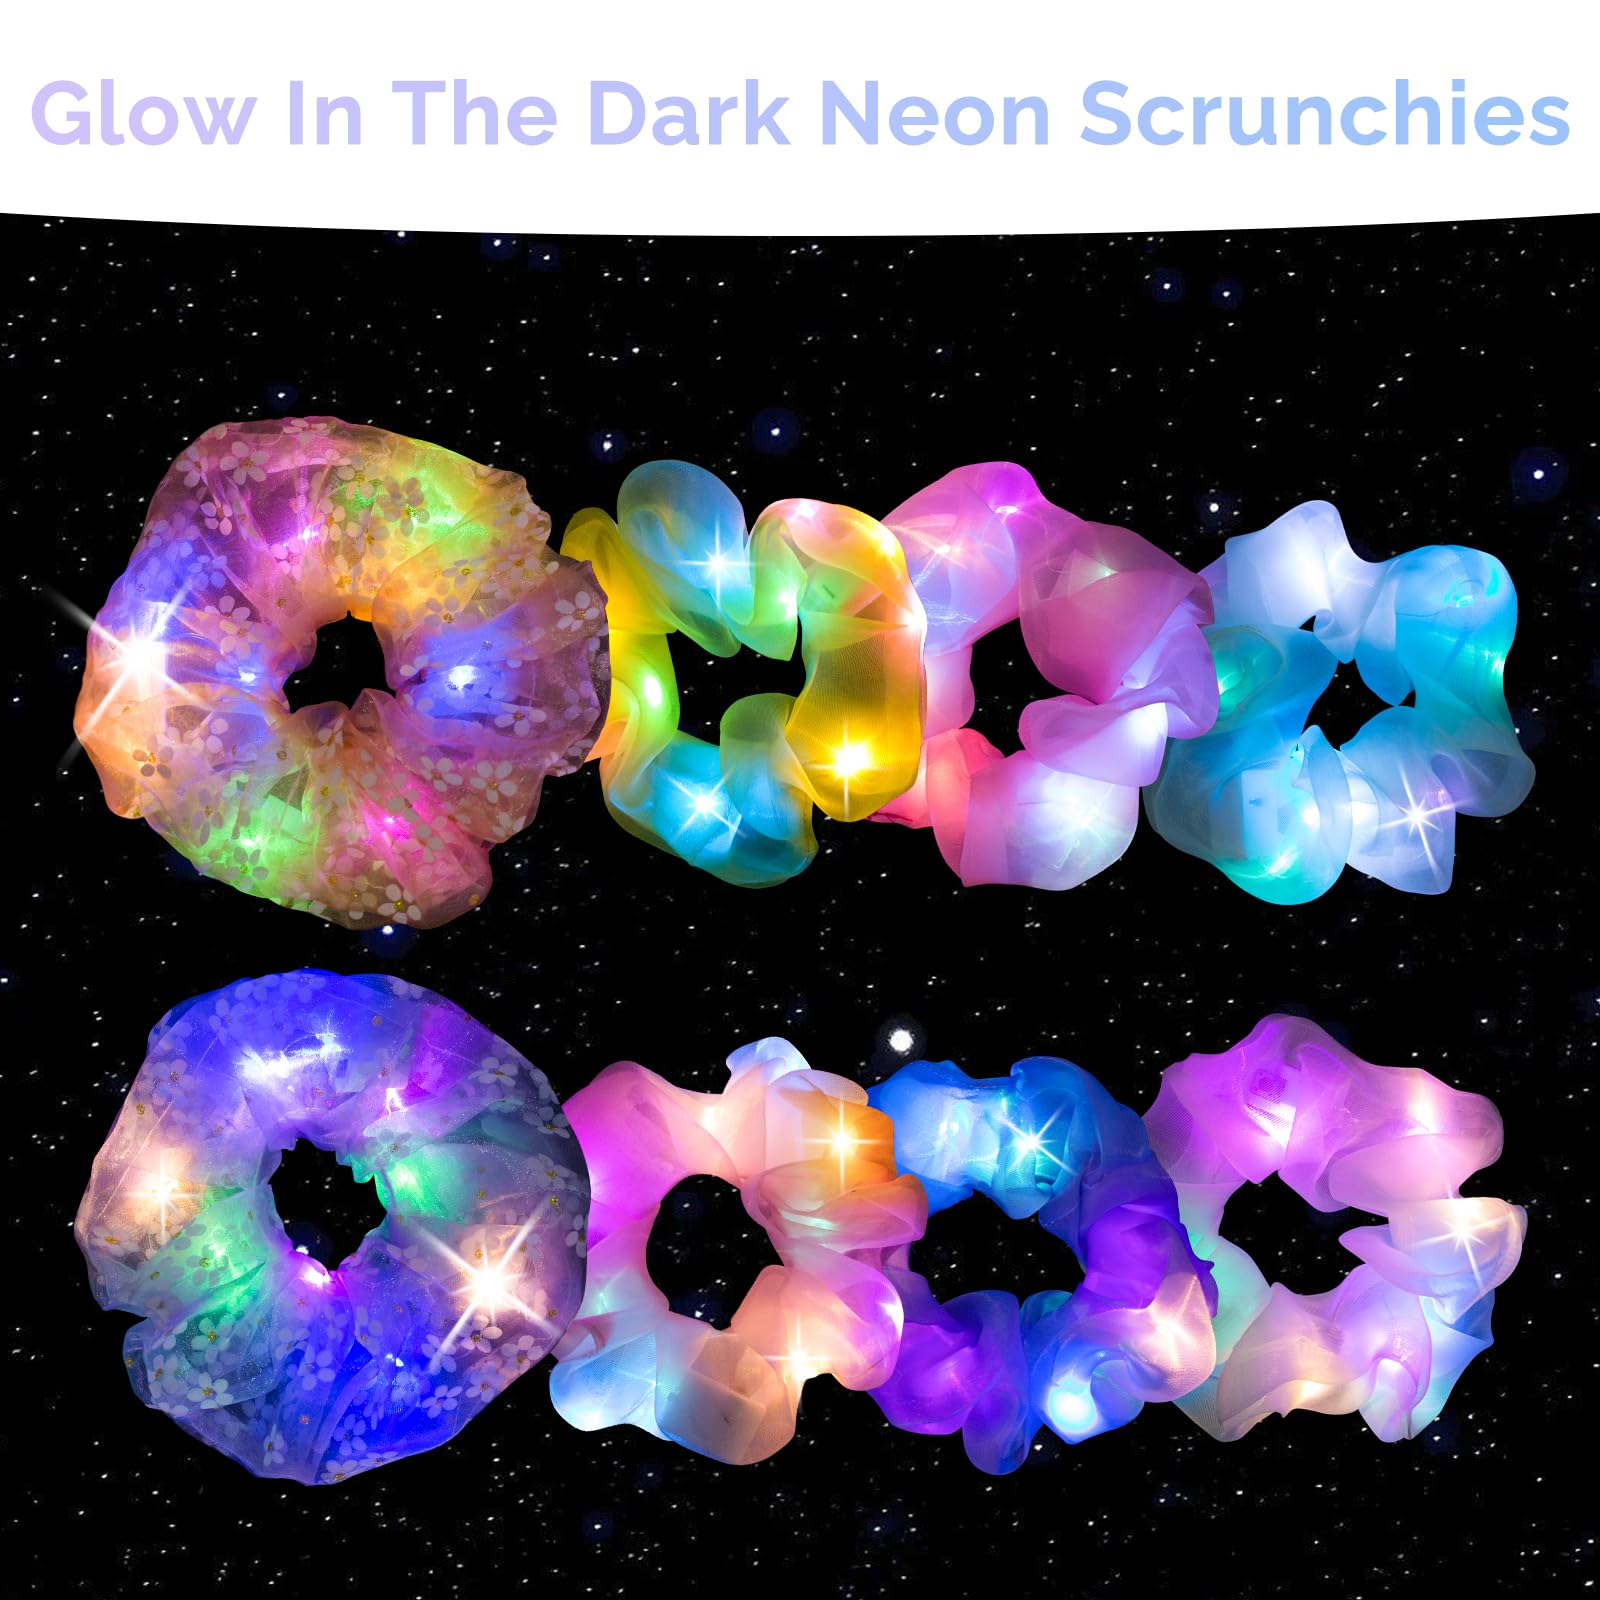 8 Pcs LED Scrunchies for Women - Scrunchy, Light Up Scrunchies for Girls, Colorful Yarn Hair Tie Multi Light Modes, Glow in the Dark Hair Accessories for Christmas Rave Party (#01)